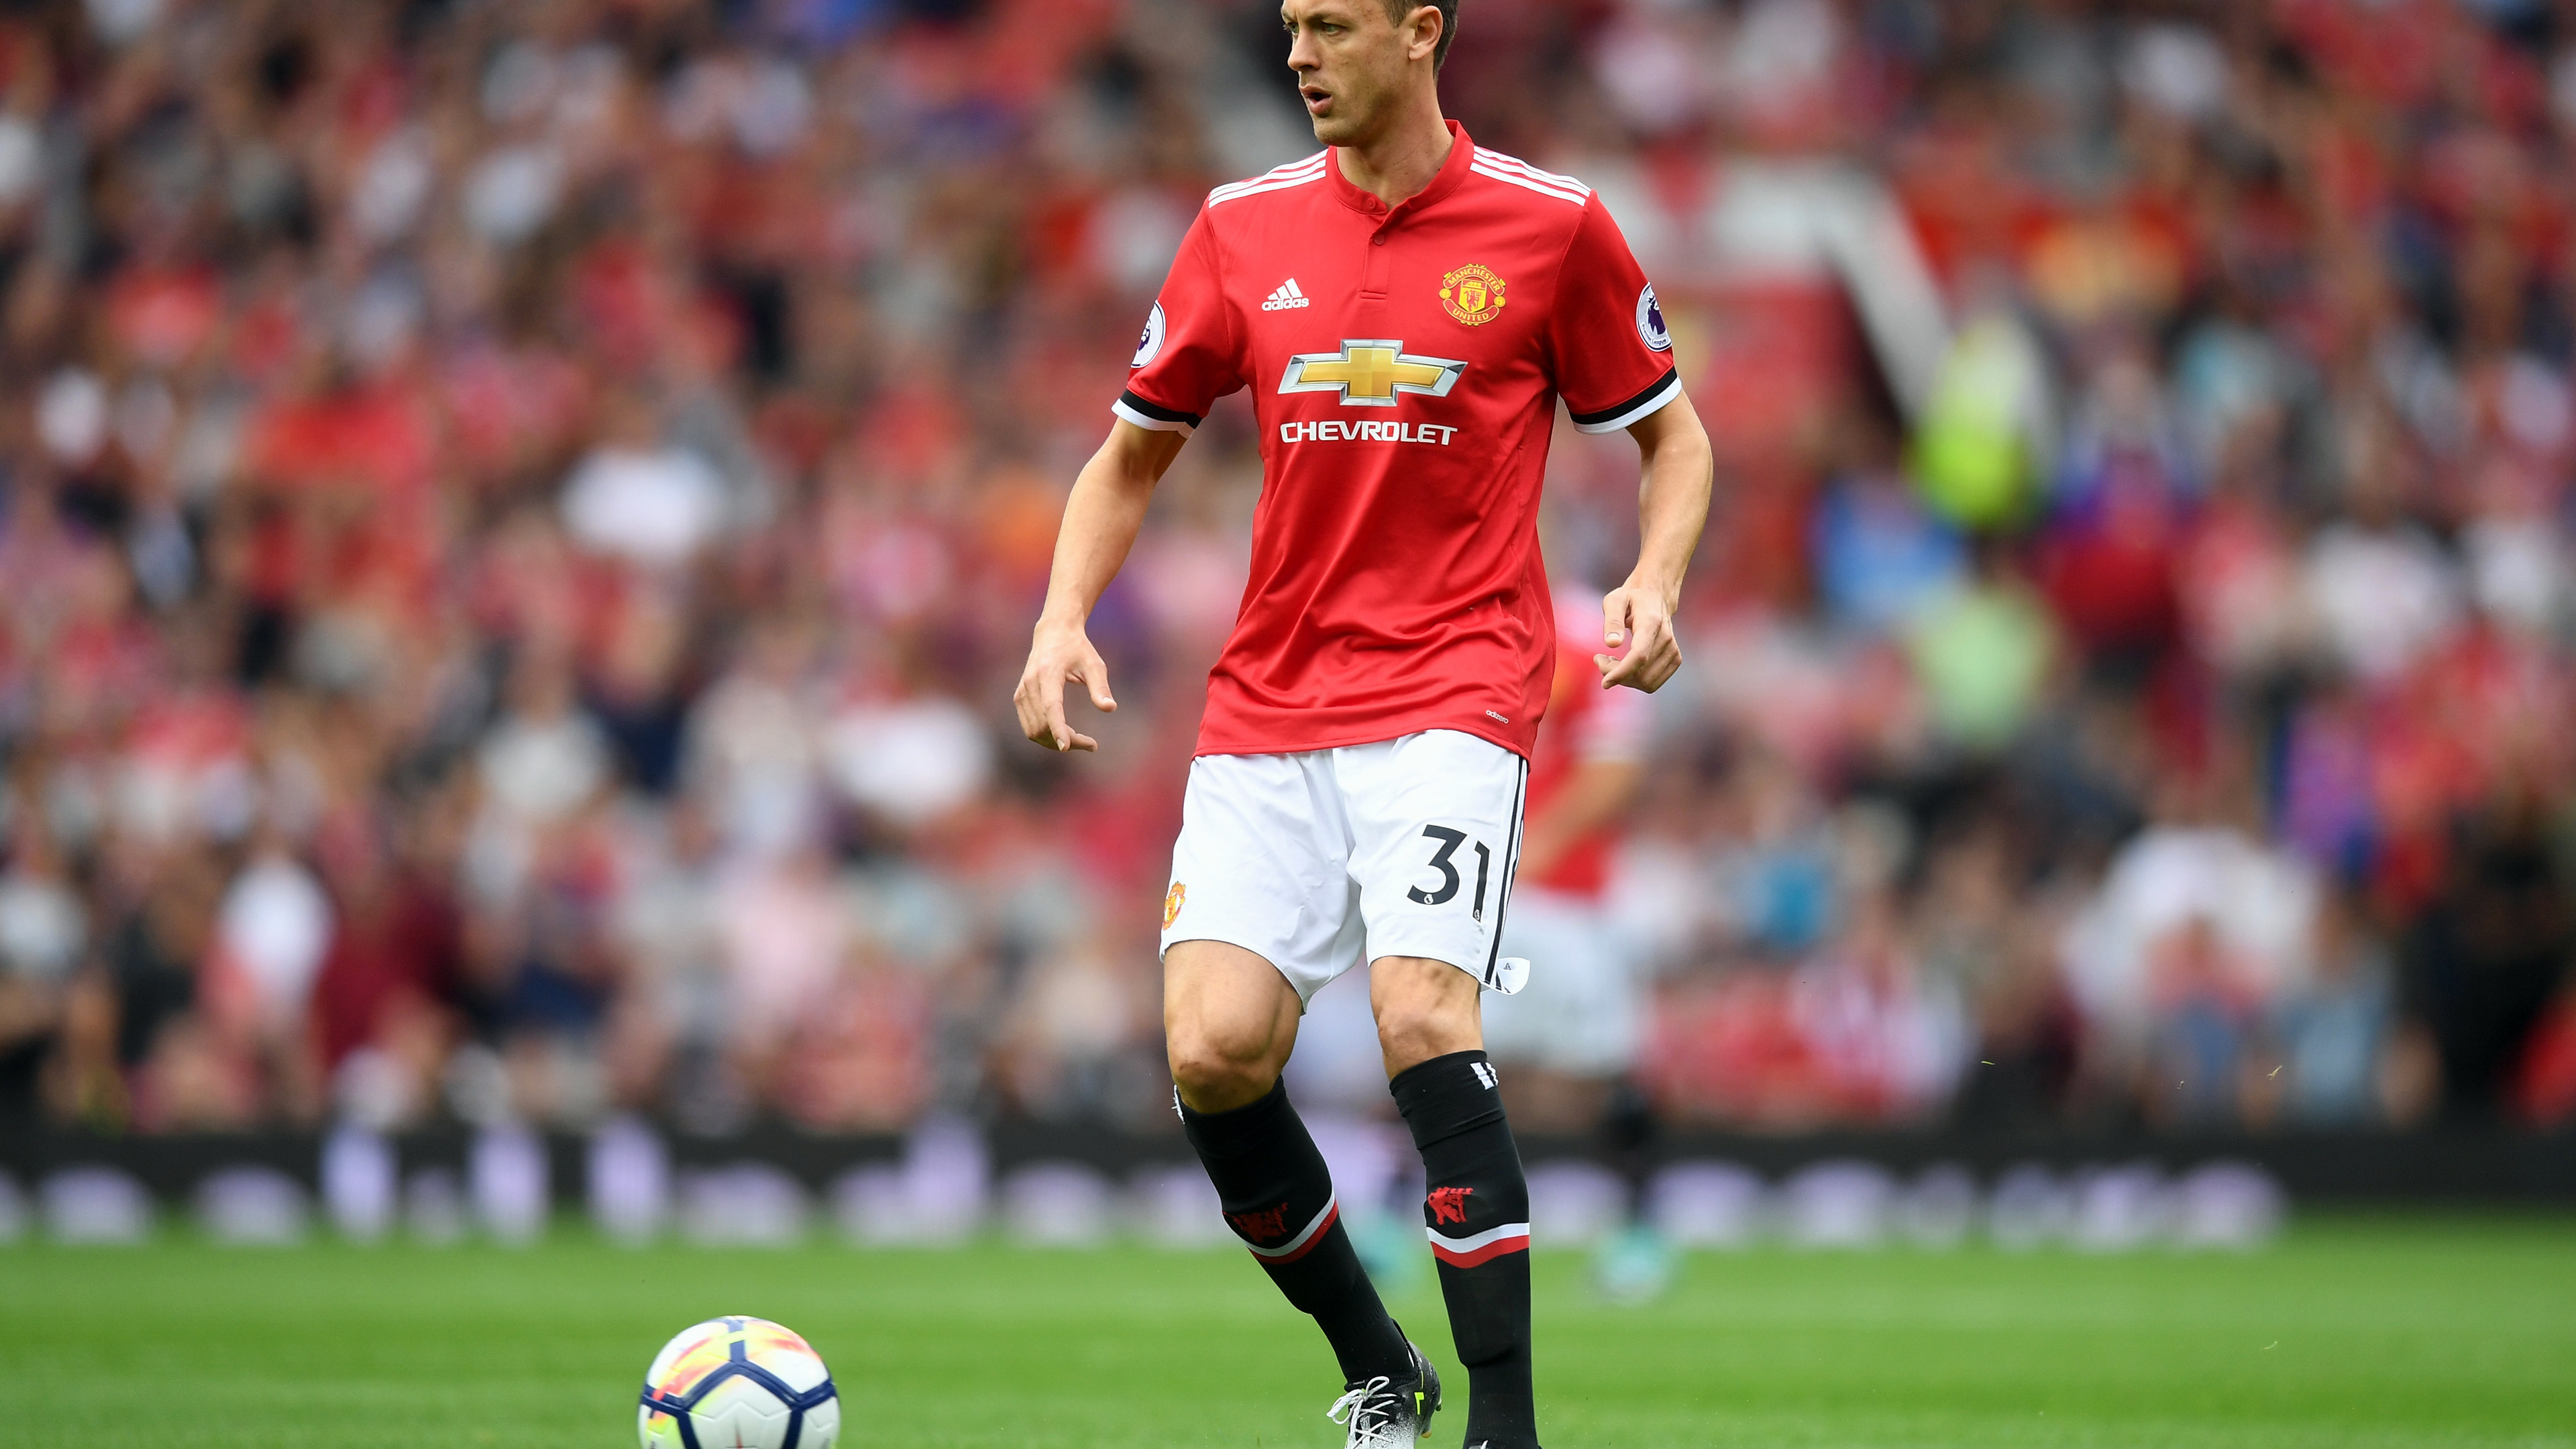 3840x2160 Nemanja Matic Manchester United Football Player 4K Wallpaper, HD  Sports 4K Wallpapers, Images, Photos and Background - Wallpapers Den